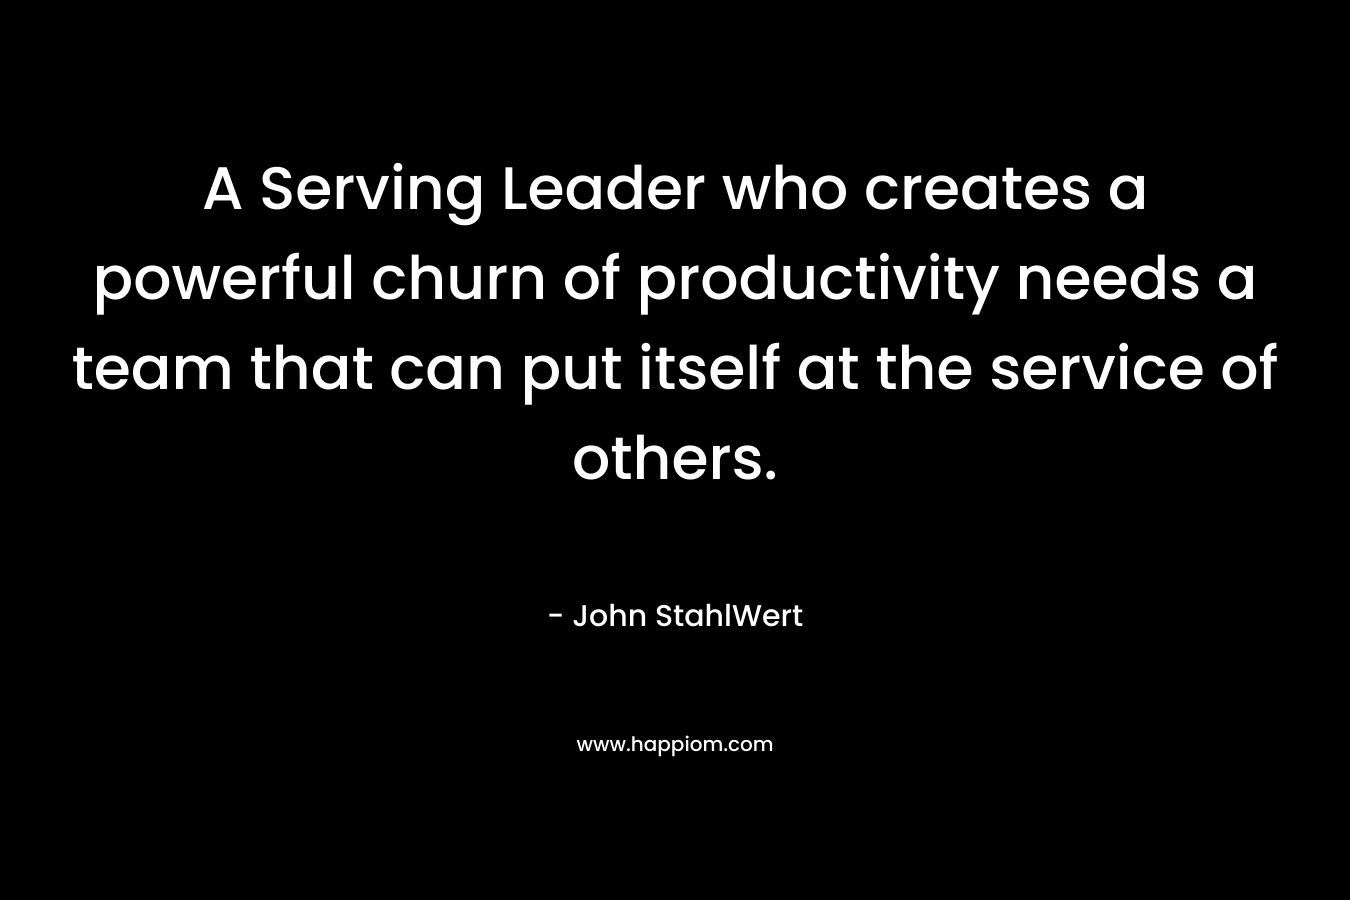 A Serving Leader who creates a powerful churn of productivity needs a team that can put itself at the service of others.